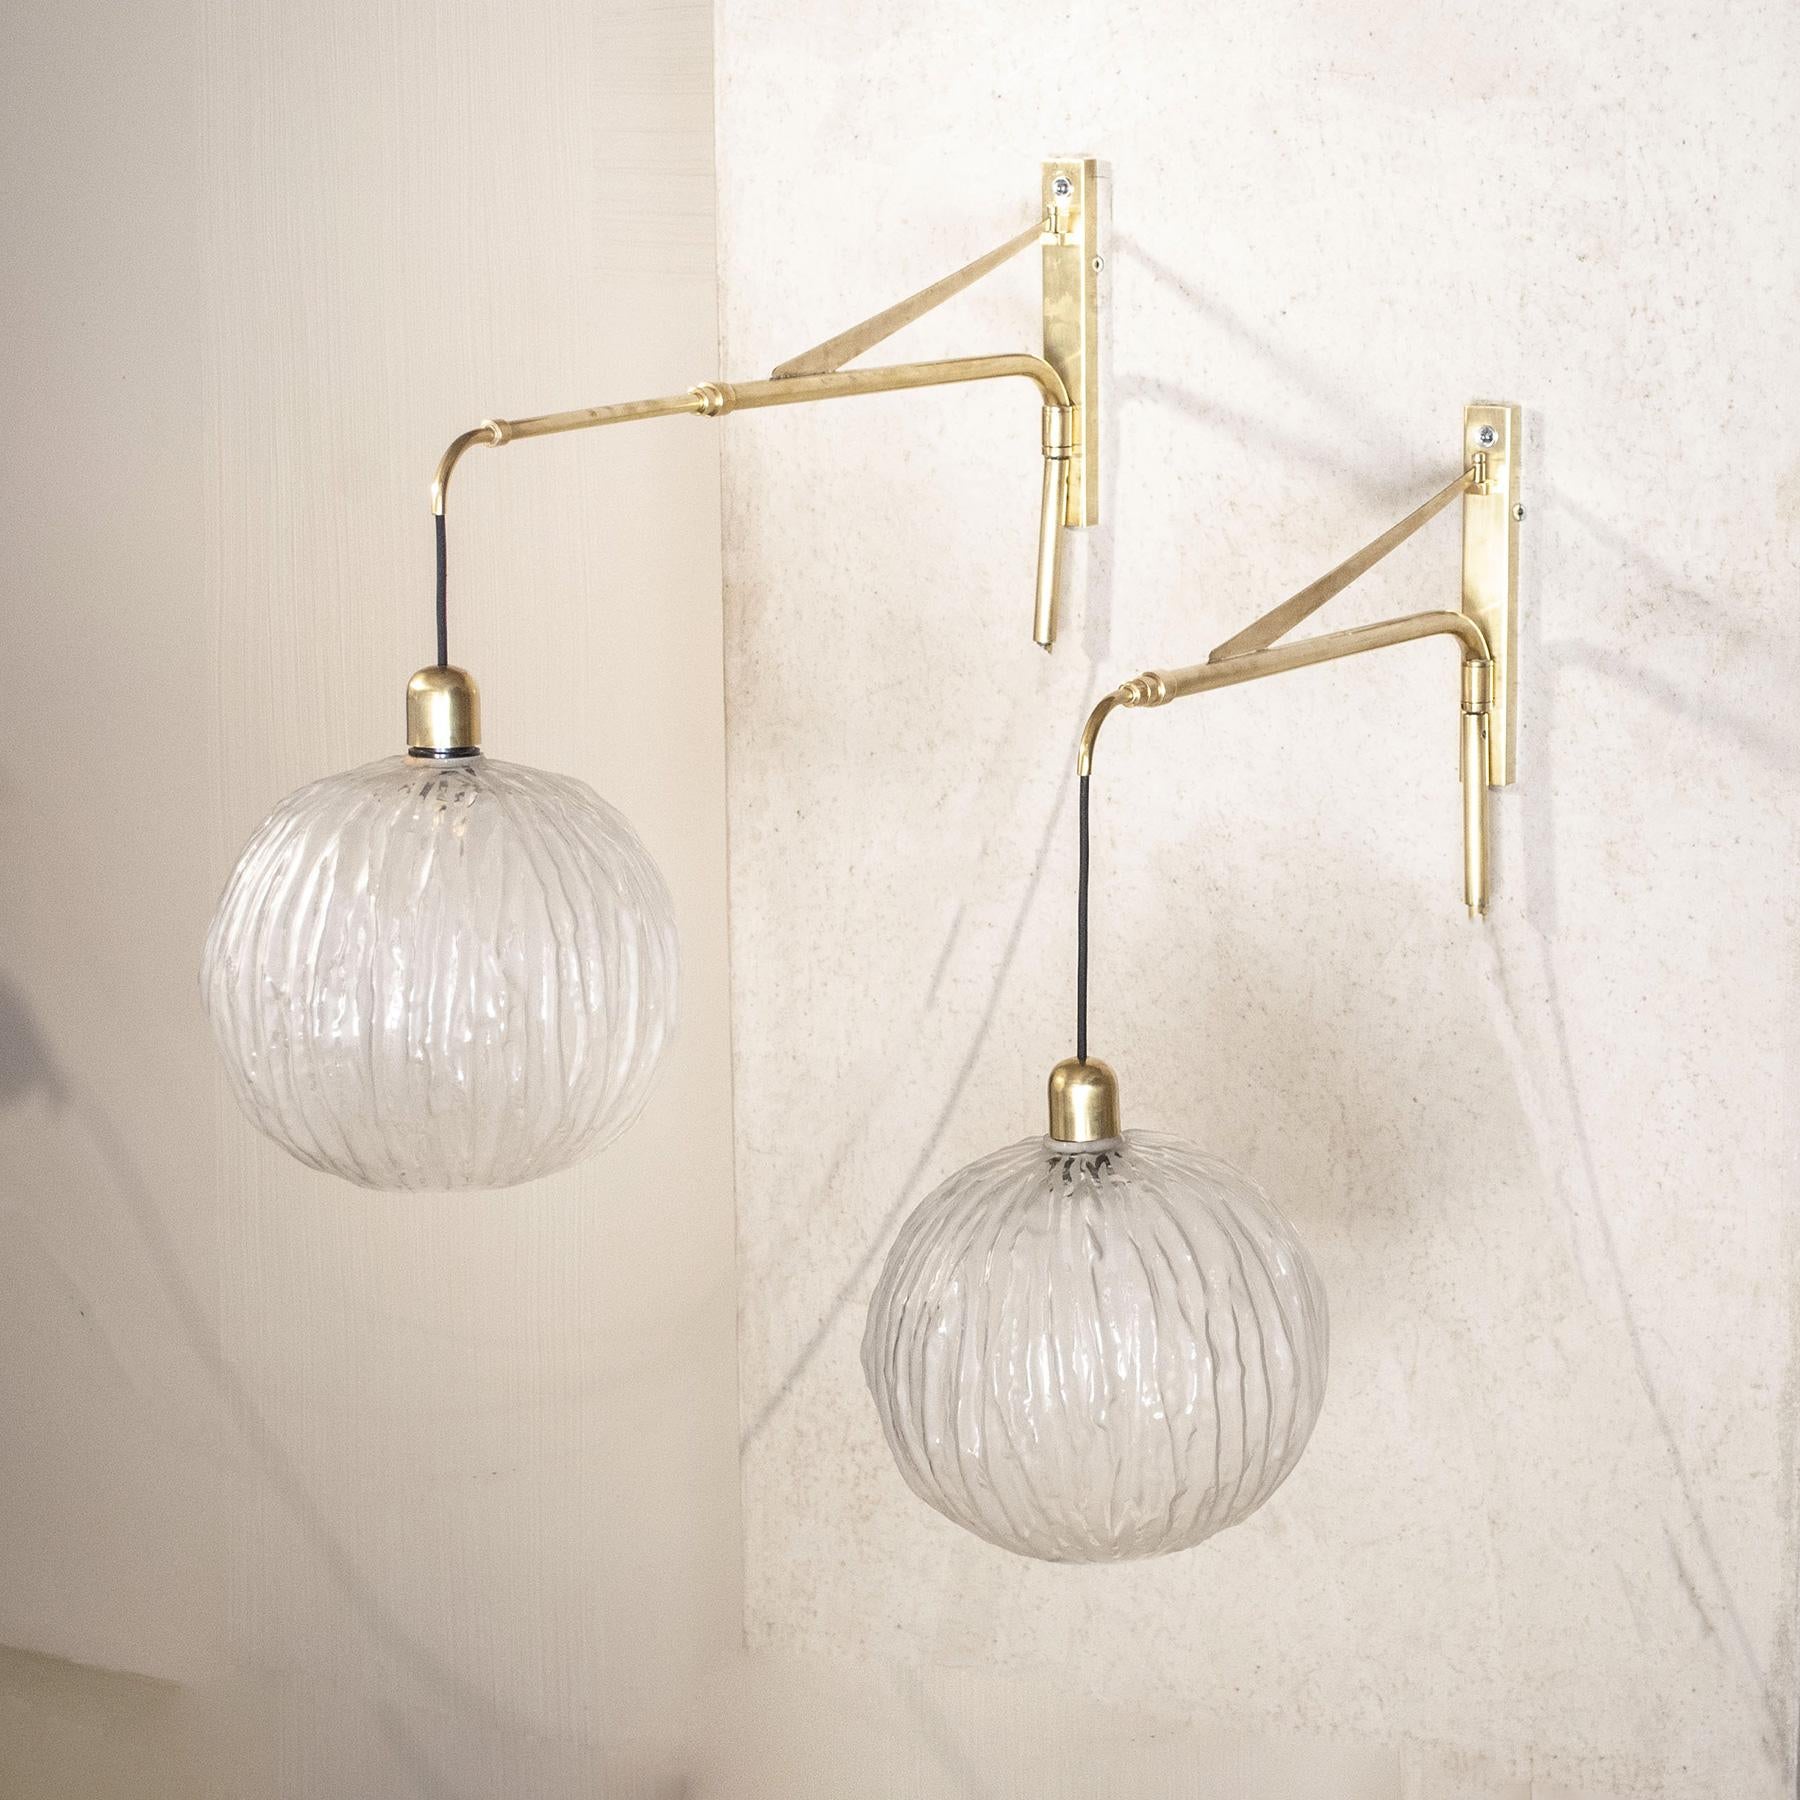 Pair of large 60's arm wall lights of rare elegance composed of a 180 ° adjustable telescopic brass structure with pumpkin-shaped spheres in finely worked glass.

Dimensions:
Minimum lamp center depth 60 cm from the wall maximum 120 cm, height shown